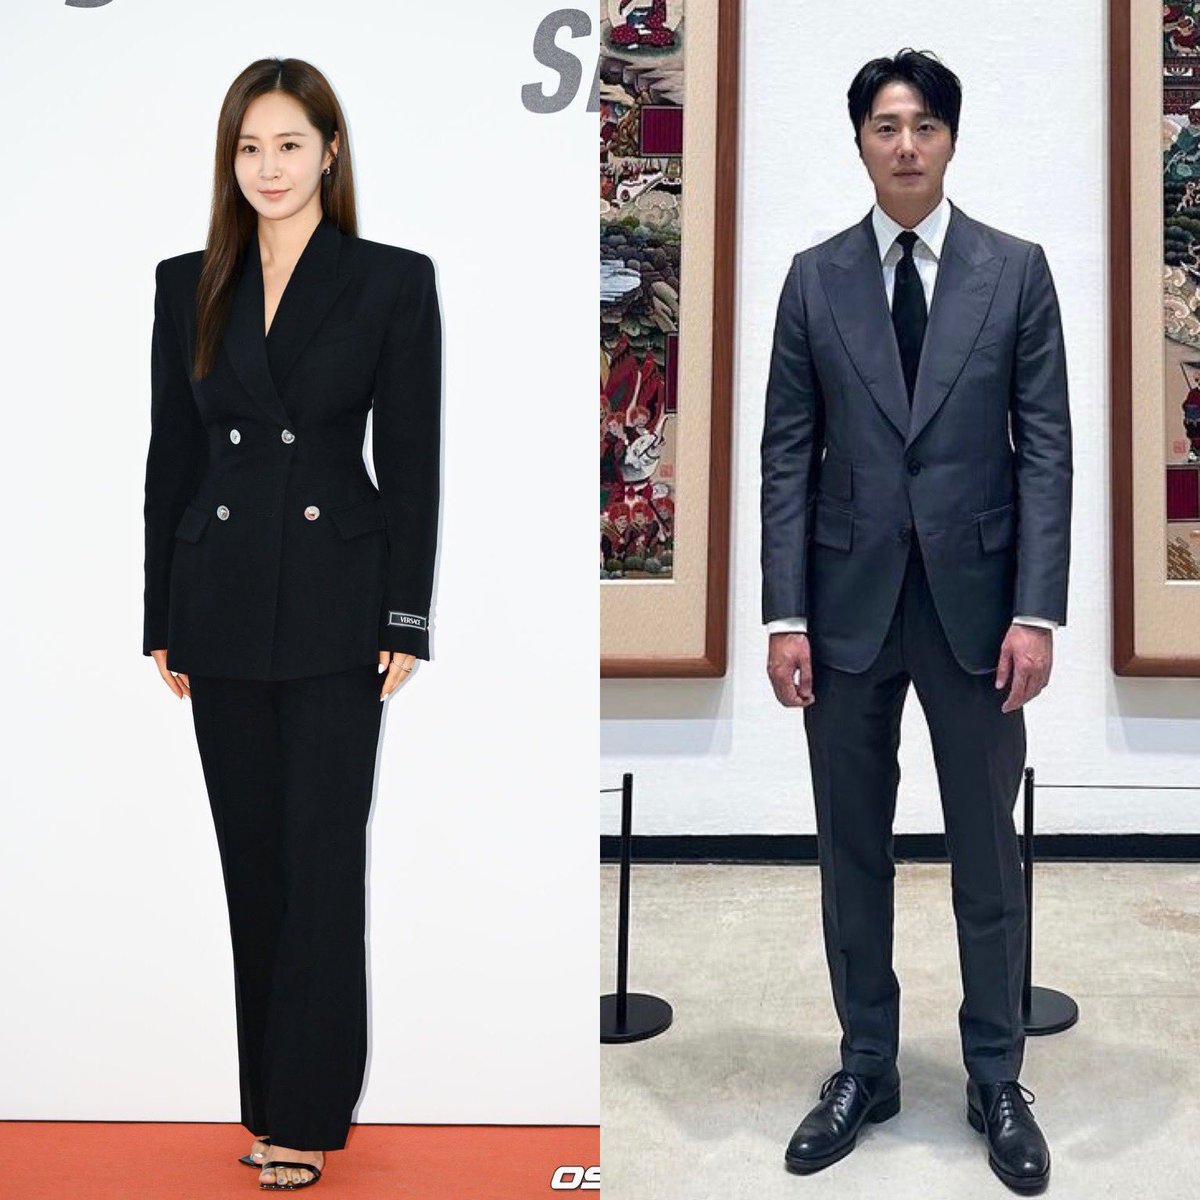 |9.22.23| YURI & ILWOO TODAY
Yuri for TaylorMade Seoul 
Ilwoo for Choi Yoo-hyun’s Embroidery Exhibition

(so glad to see them for real-time today 🥹)

📸©️to OSEN and jilwww IG